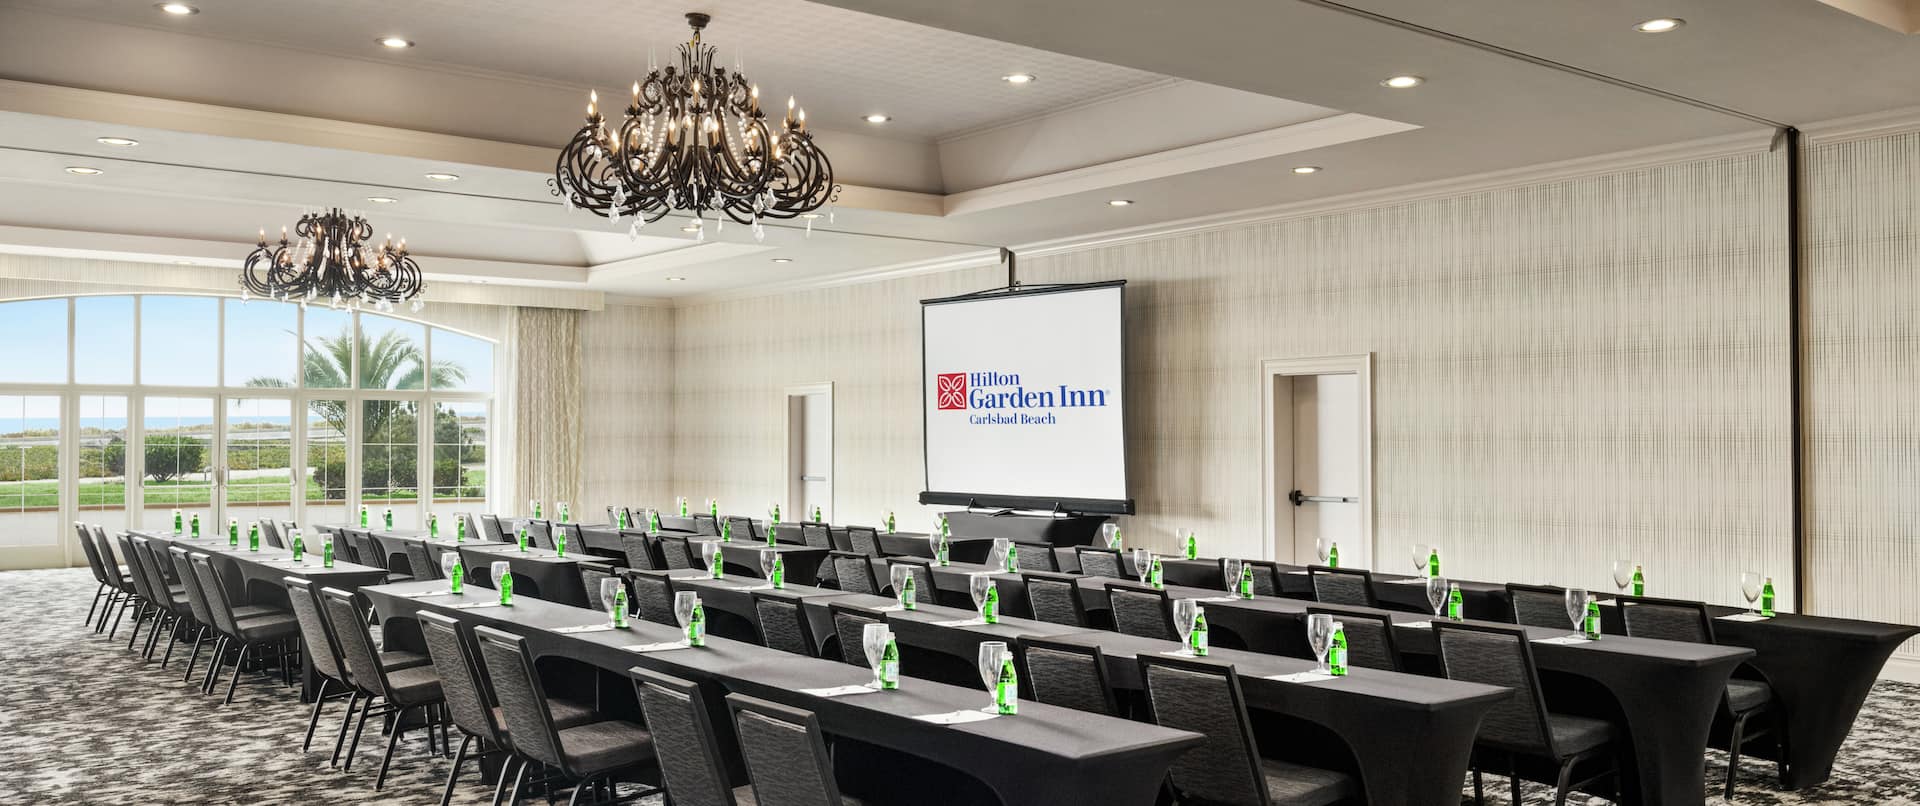 Spacious on-site ballroom featuring ample classroom style seating, large window, and projector screen at front of room.